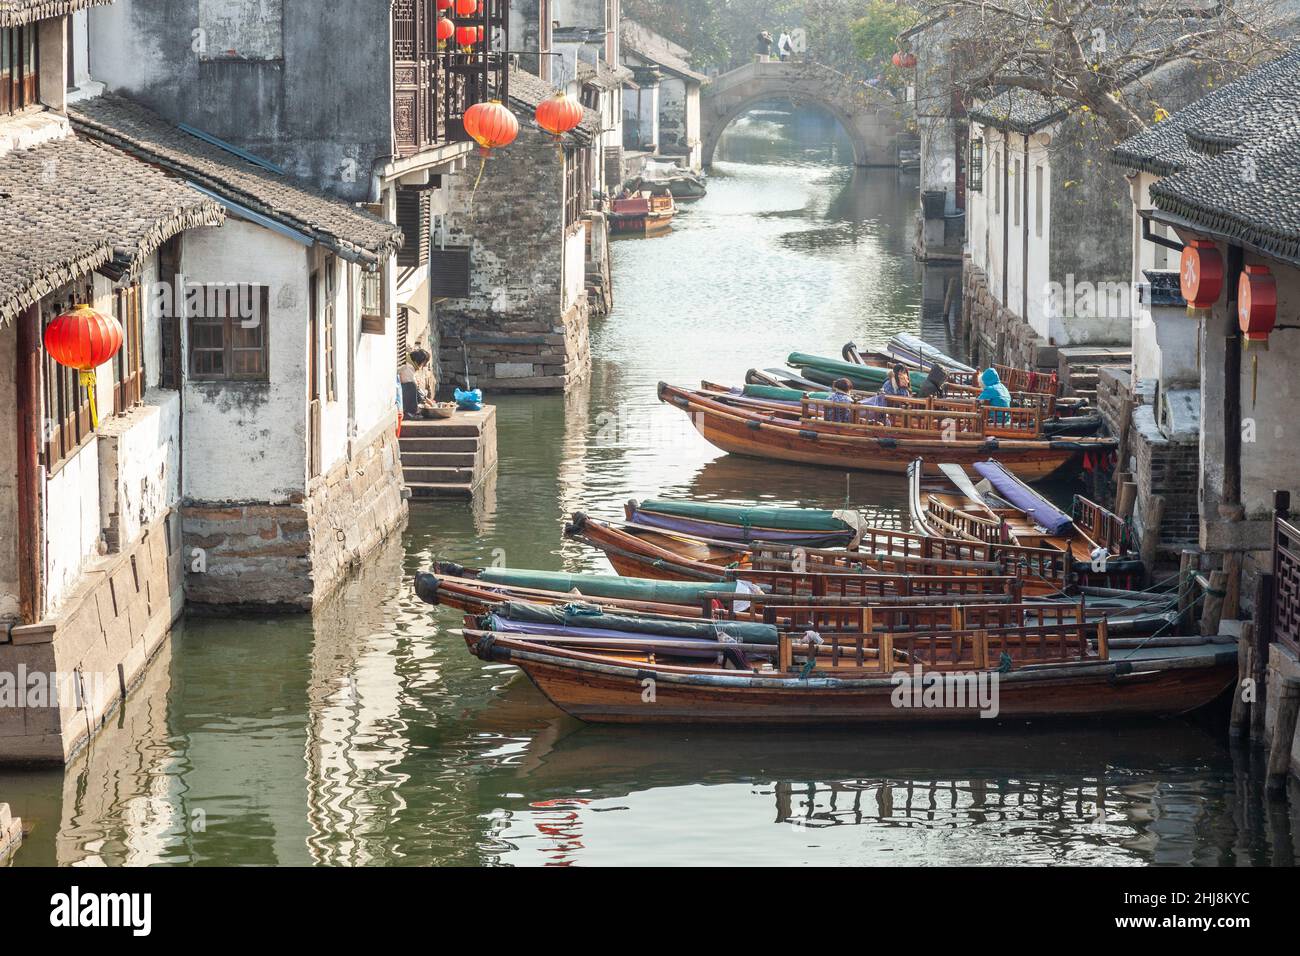 View of a canal with water taxis in the water town of Zhouzhuang, China Stock Photo